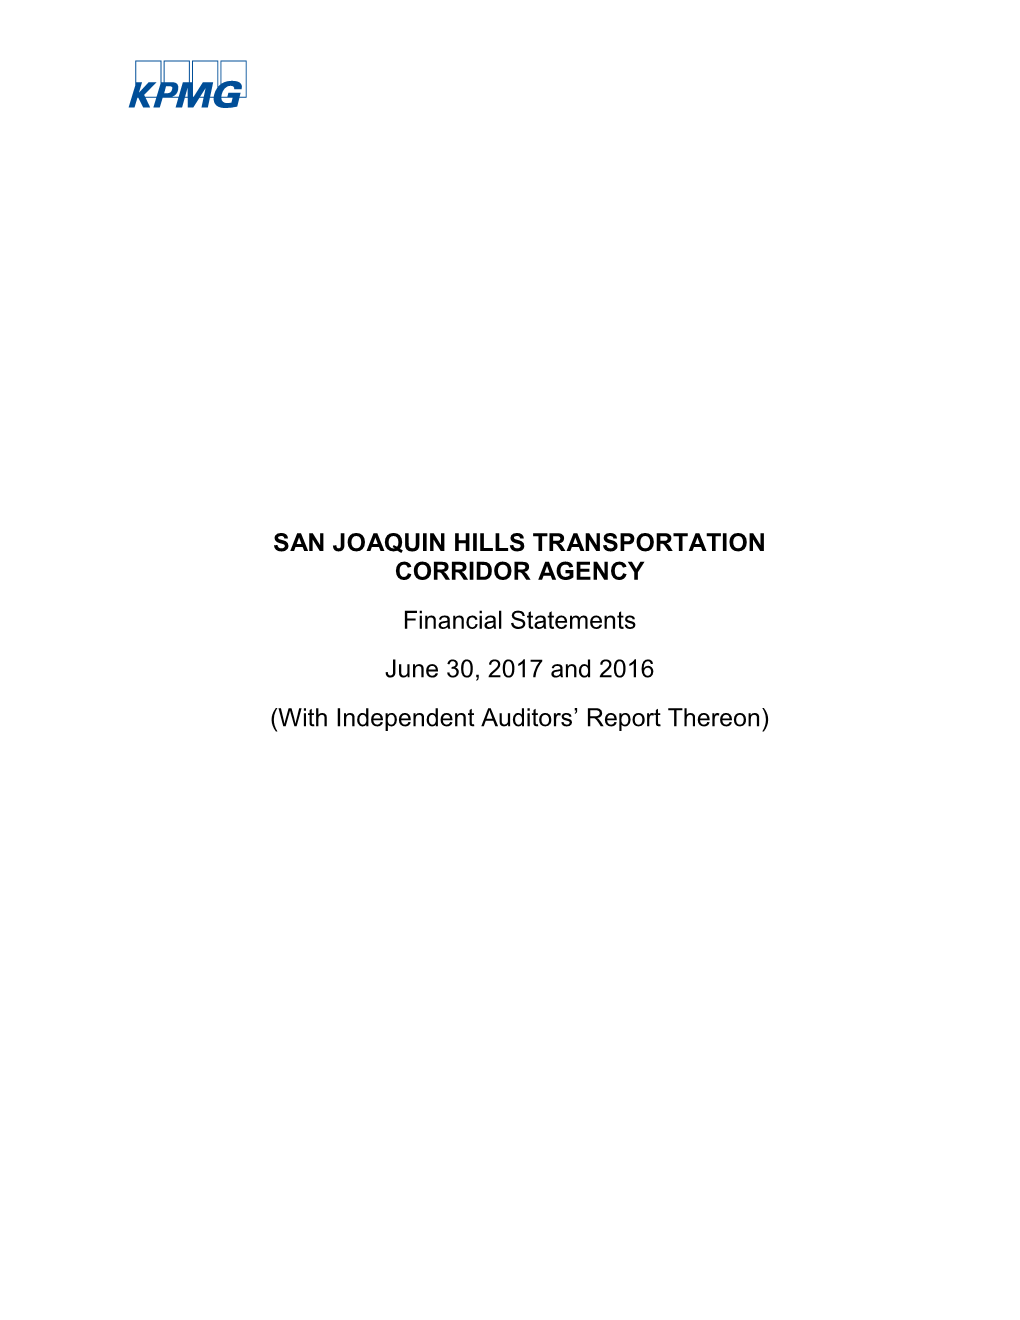 SAN JOAQUIN HILLS TRANSPORTATION CORRIDOR AGENCY Financial Statements June 30, 2017 and 2016 (With Independent Auditors’ Report Thereon)